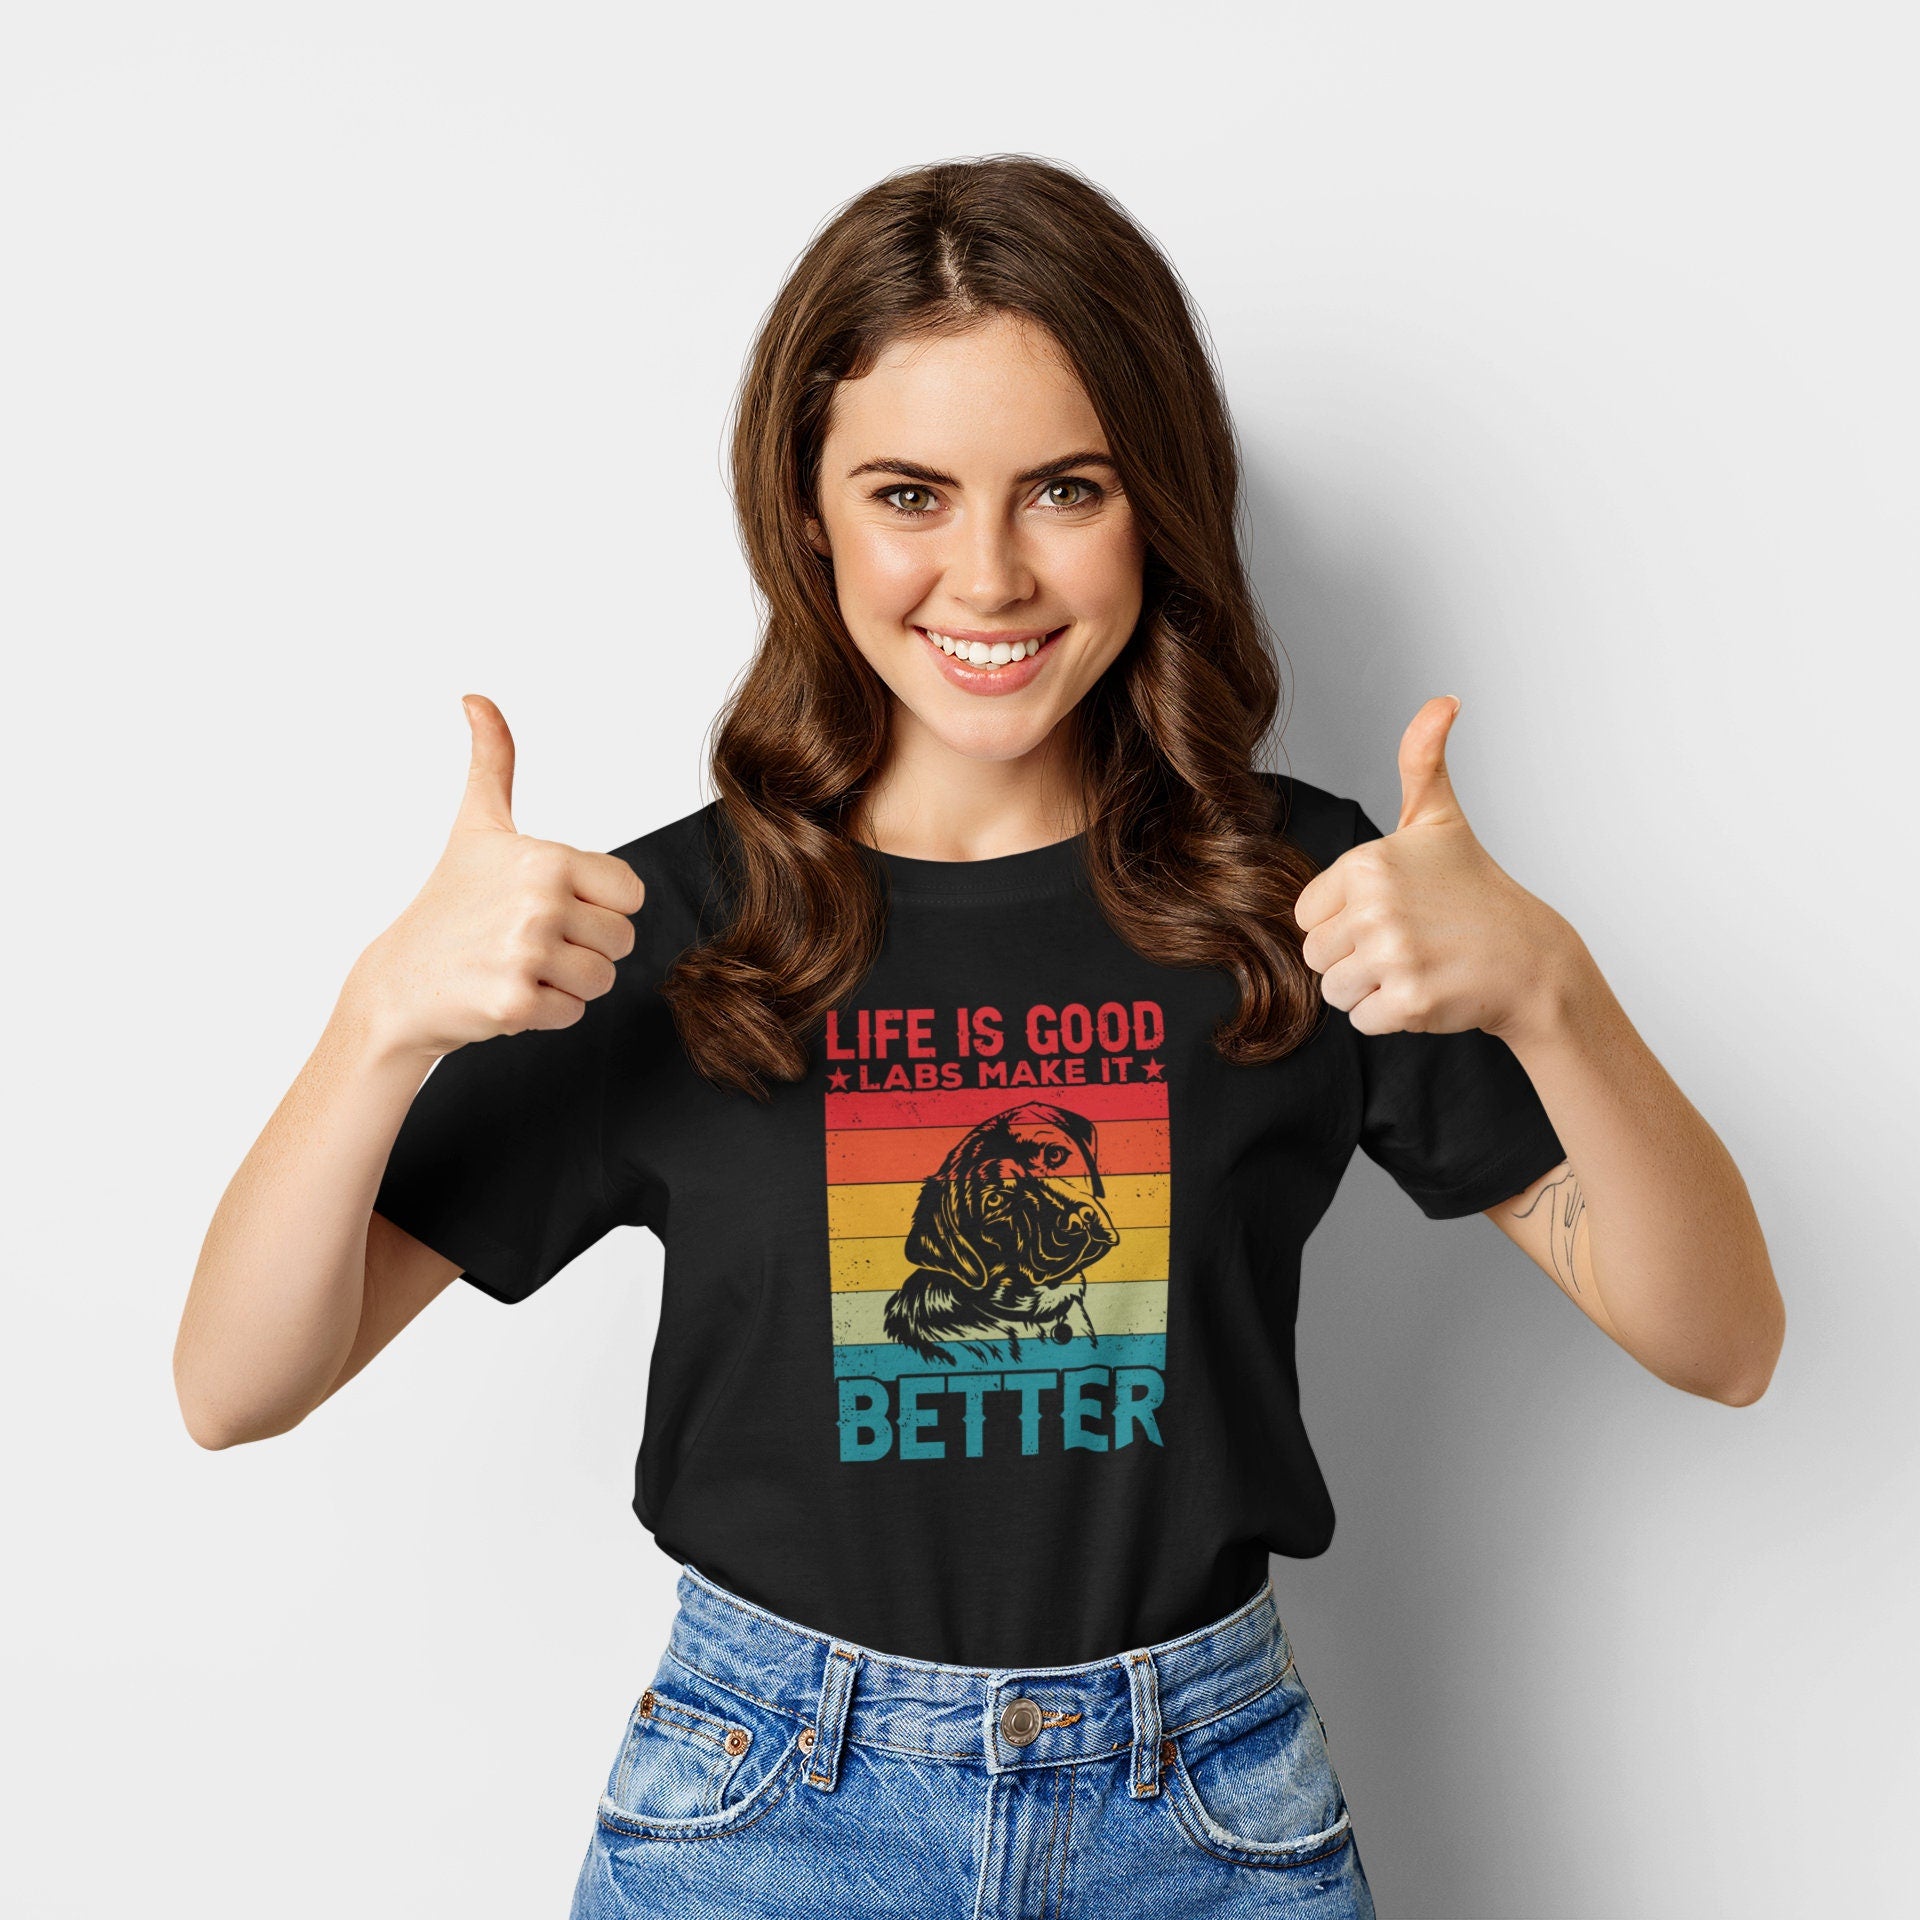 Life Is Good Labs Make It Better Shirt, Labrador Mom Shirt, Labrador Dad Tee, Labrador Owner